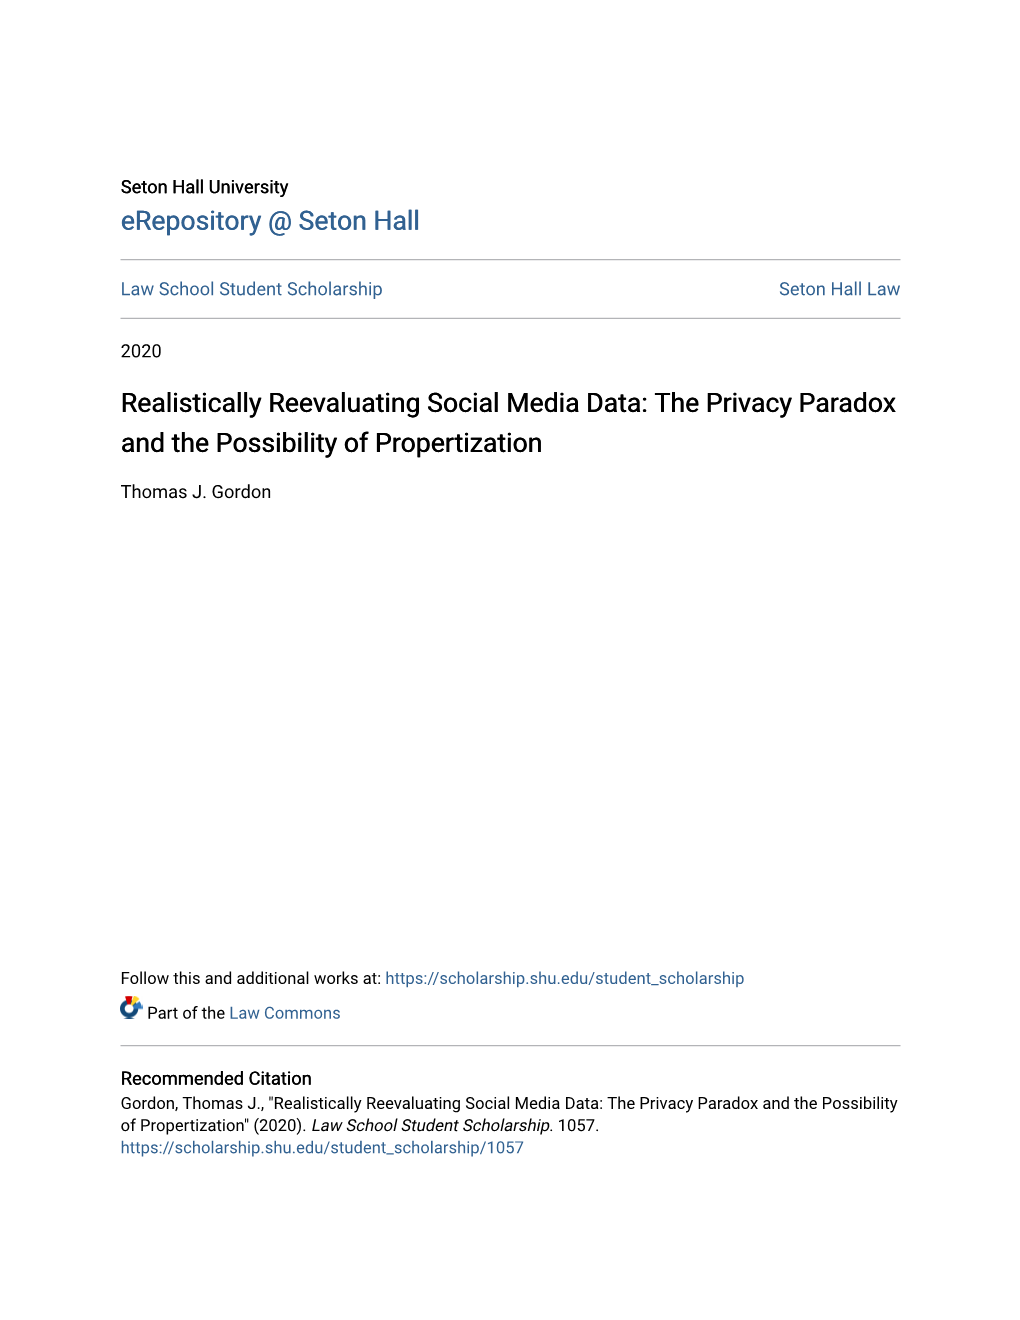 Realistically Reevaluating Social Media Data: the Privacy Paradox and the Possibility of Propertization